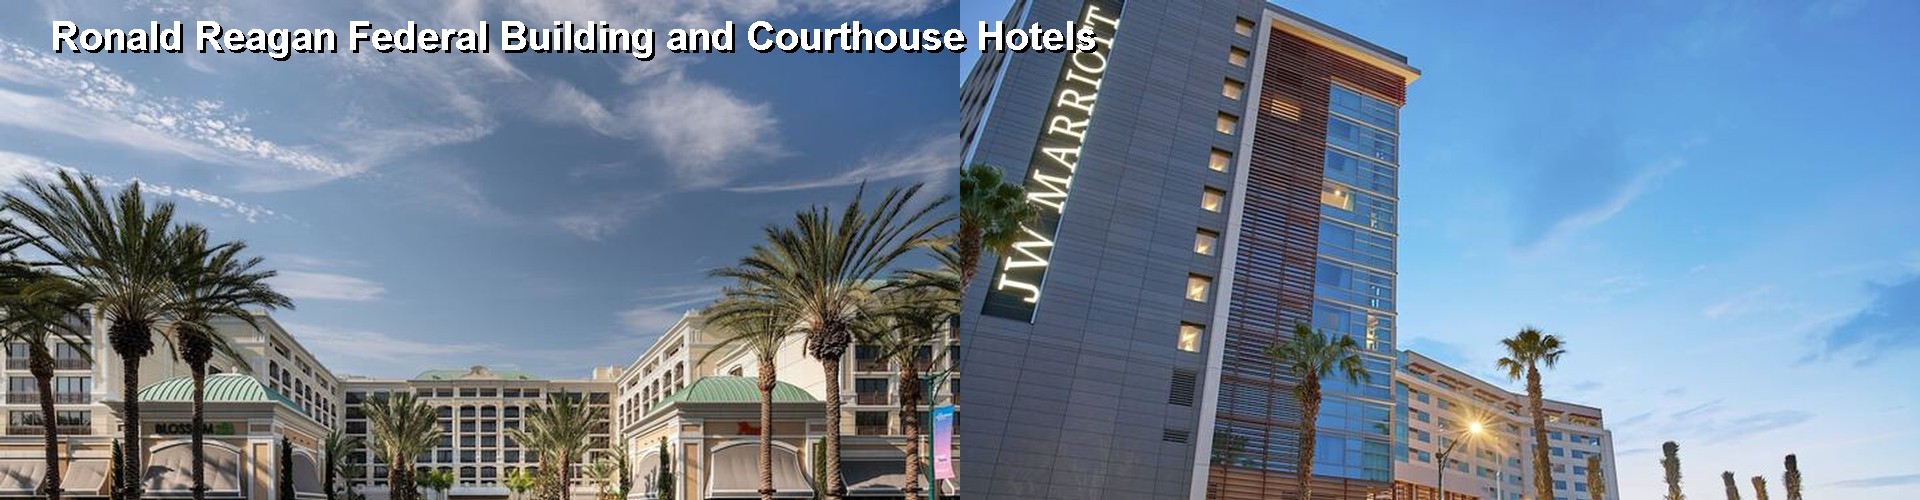 3 Best Hotels near Ronald Reagan Federal Building and Courthouse